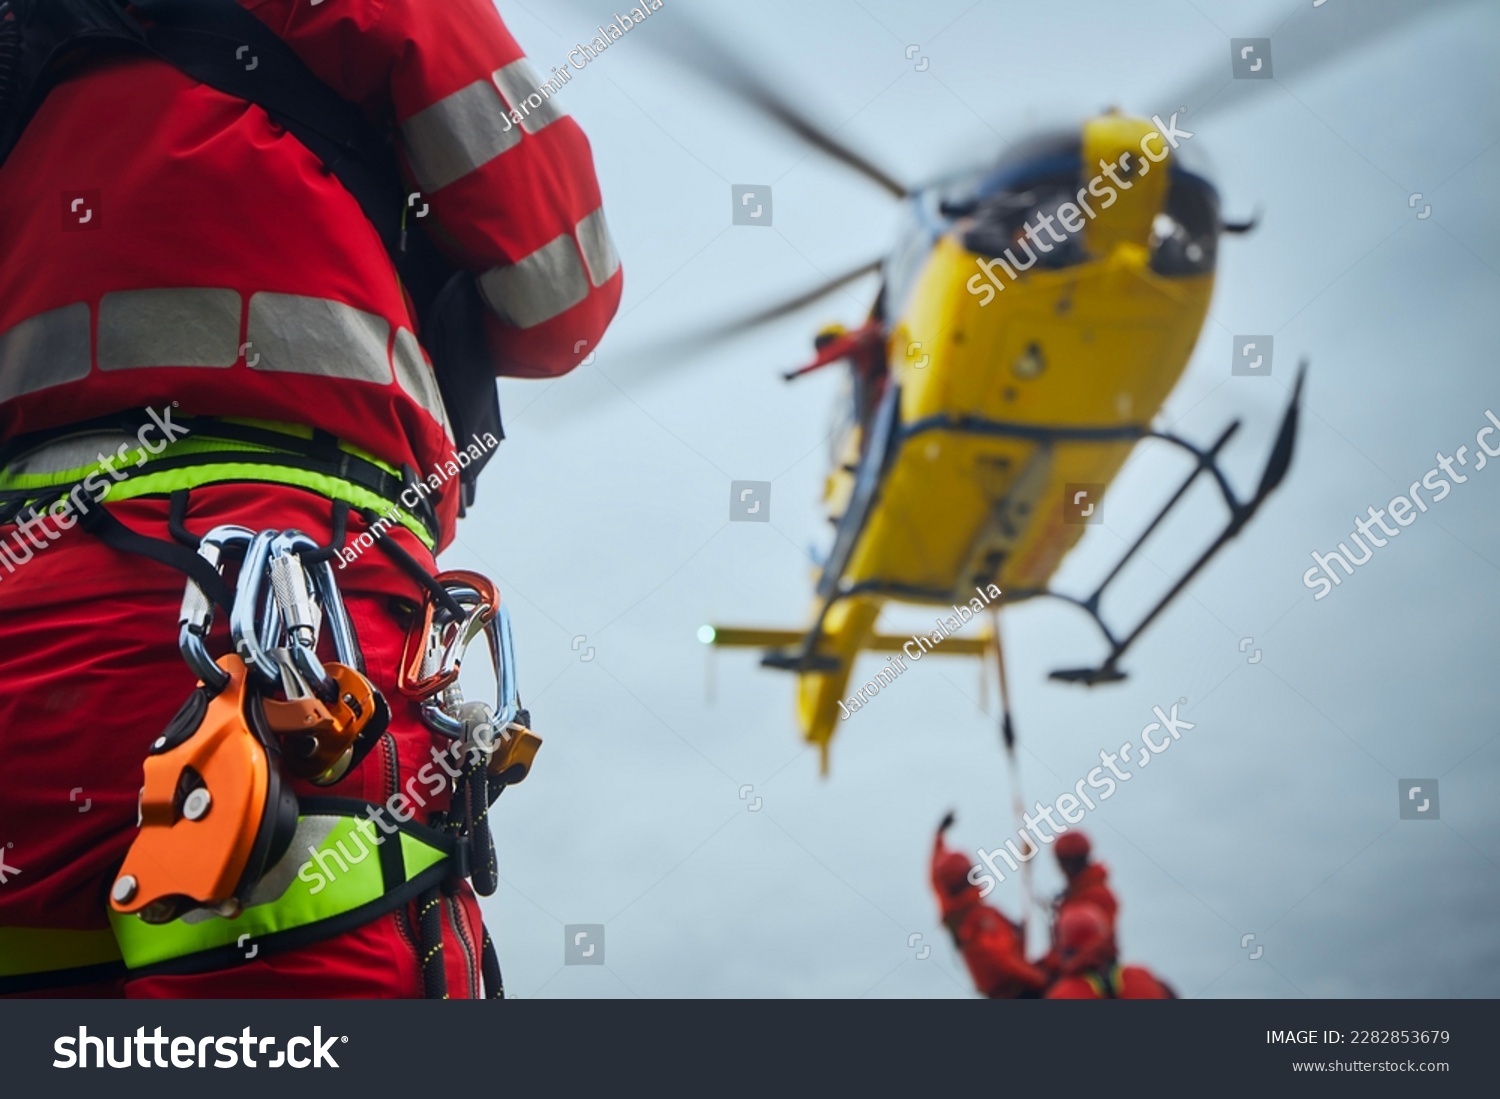 Selective focus on safety harness of paramedic of emergency service in front of helicopter. Themes rescue, help and hope.
 #2282853679